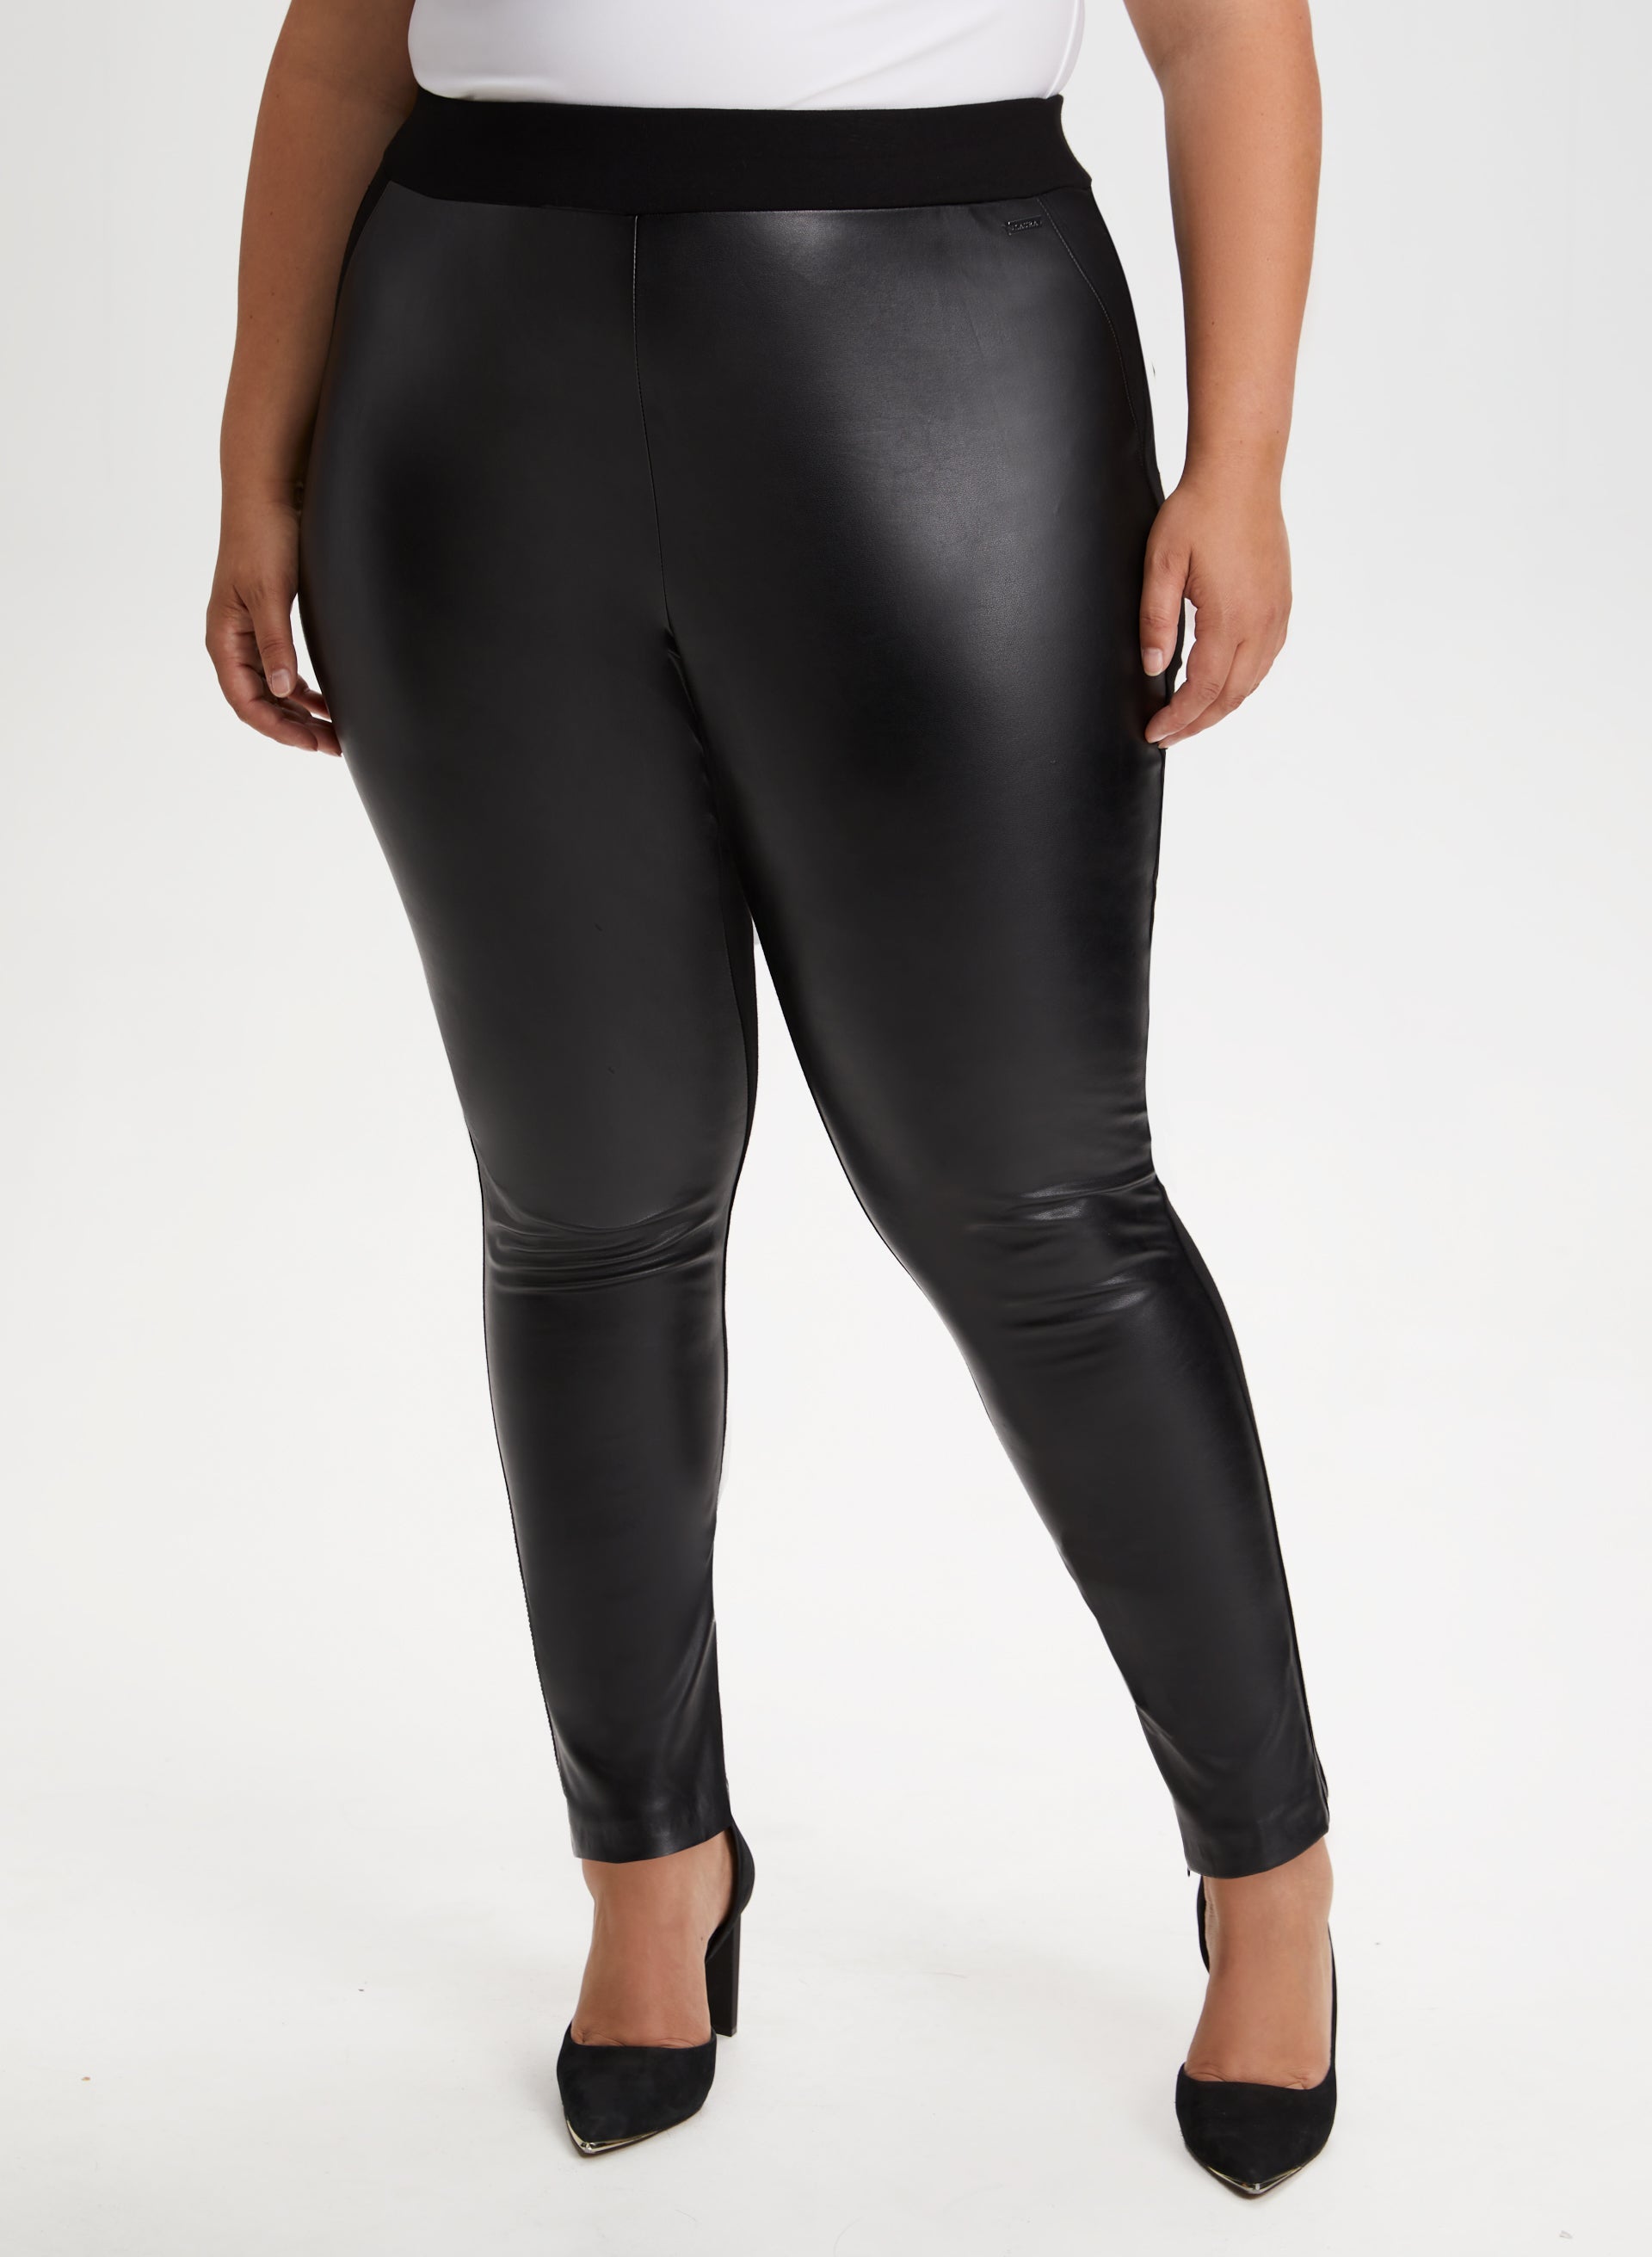 Cocoon Shape Wear Women's High-Waisted Capri Leggings - Sculpt Your Figure  with Style, Bathroom Friendly, Black, Medium at  Women's Clothing  store